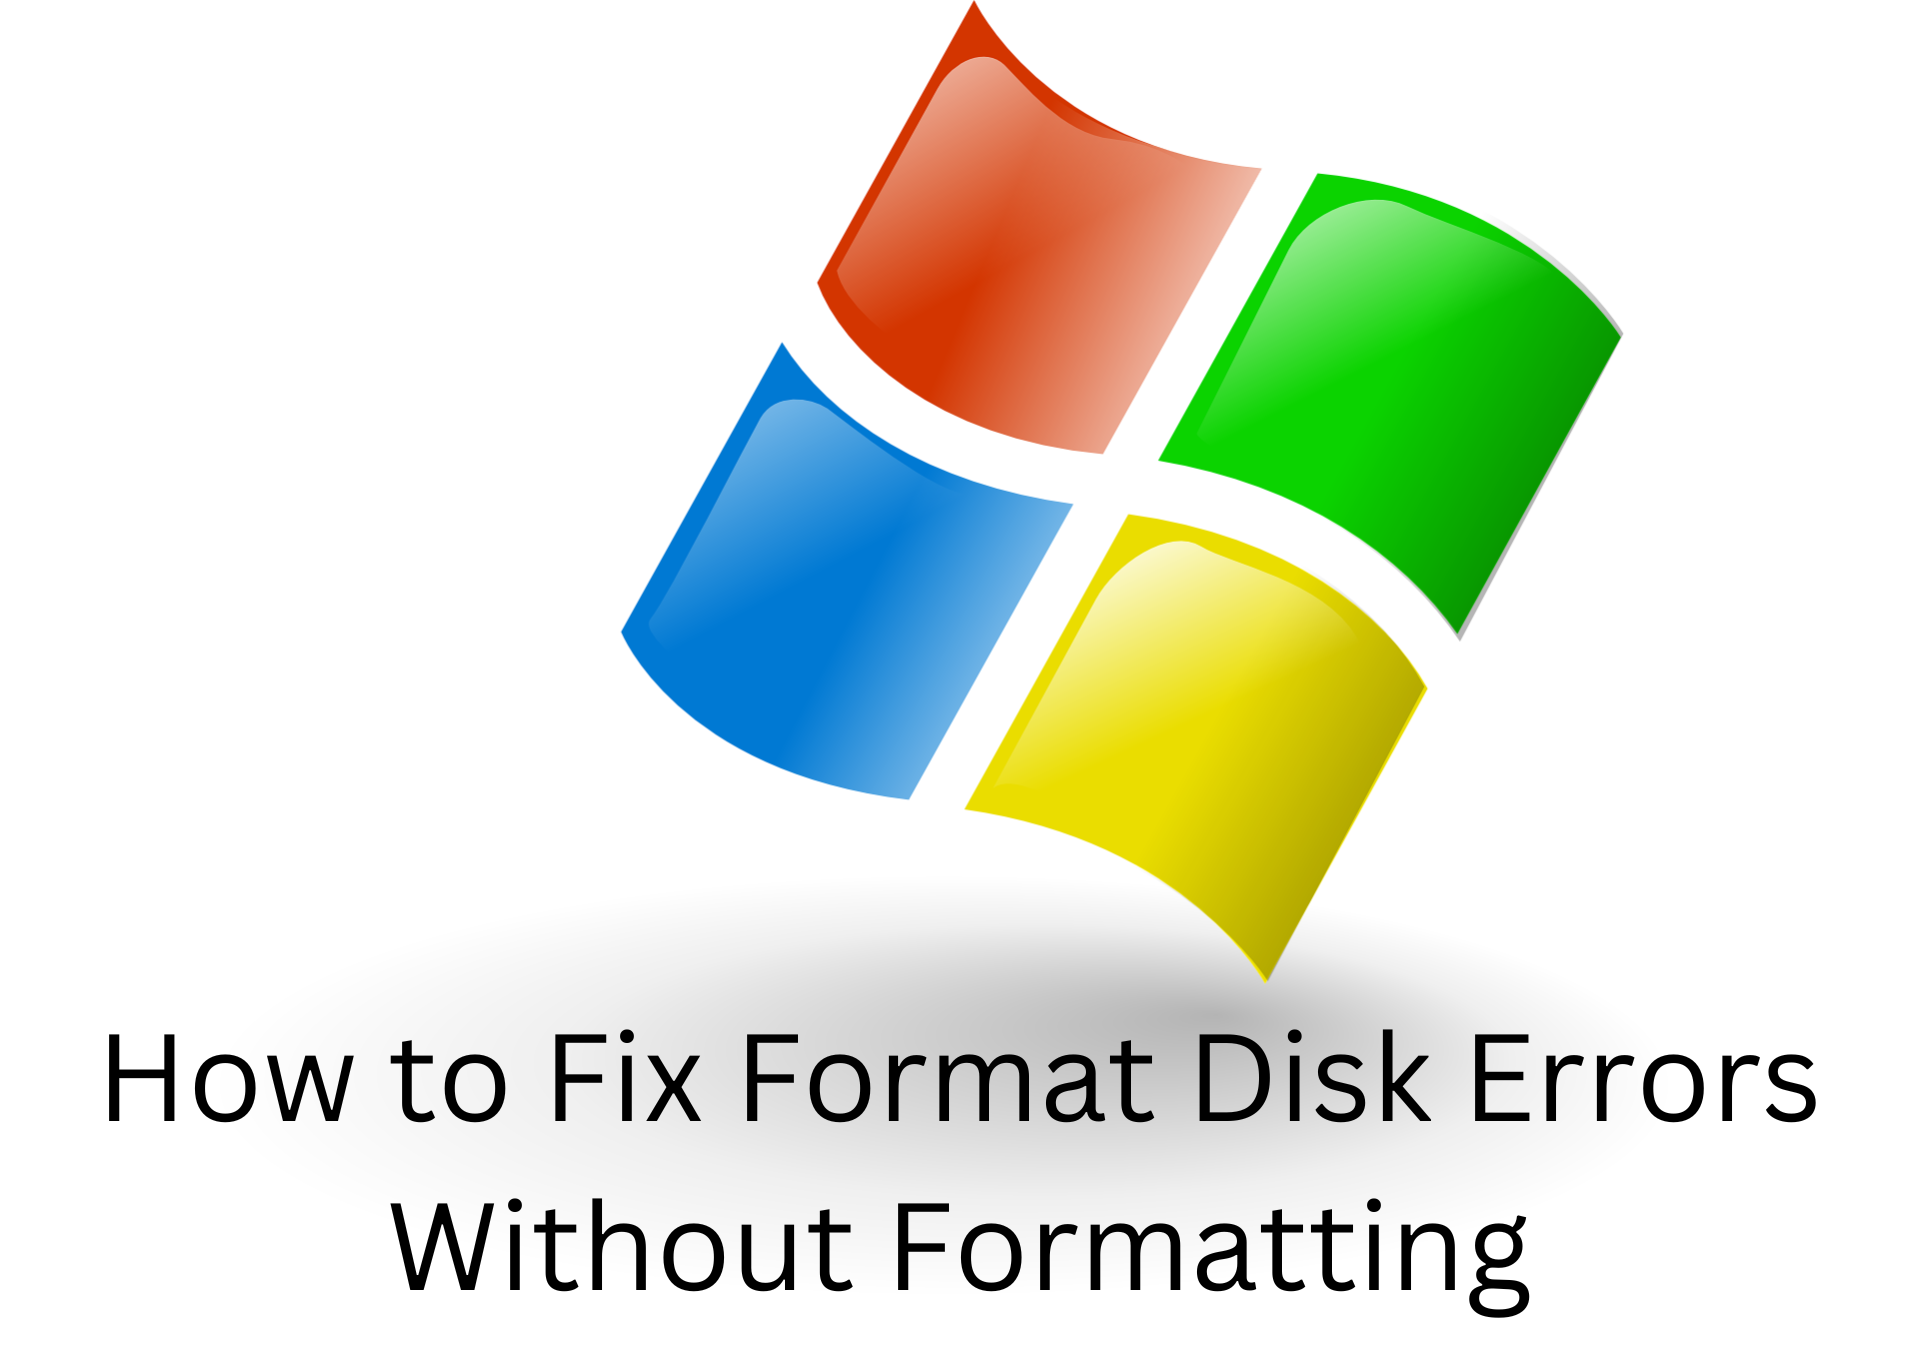 How To Fix Format Disk Errors Without Formatting